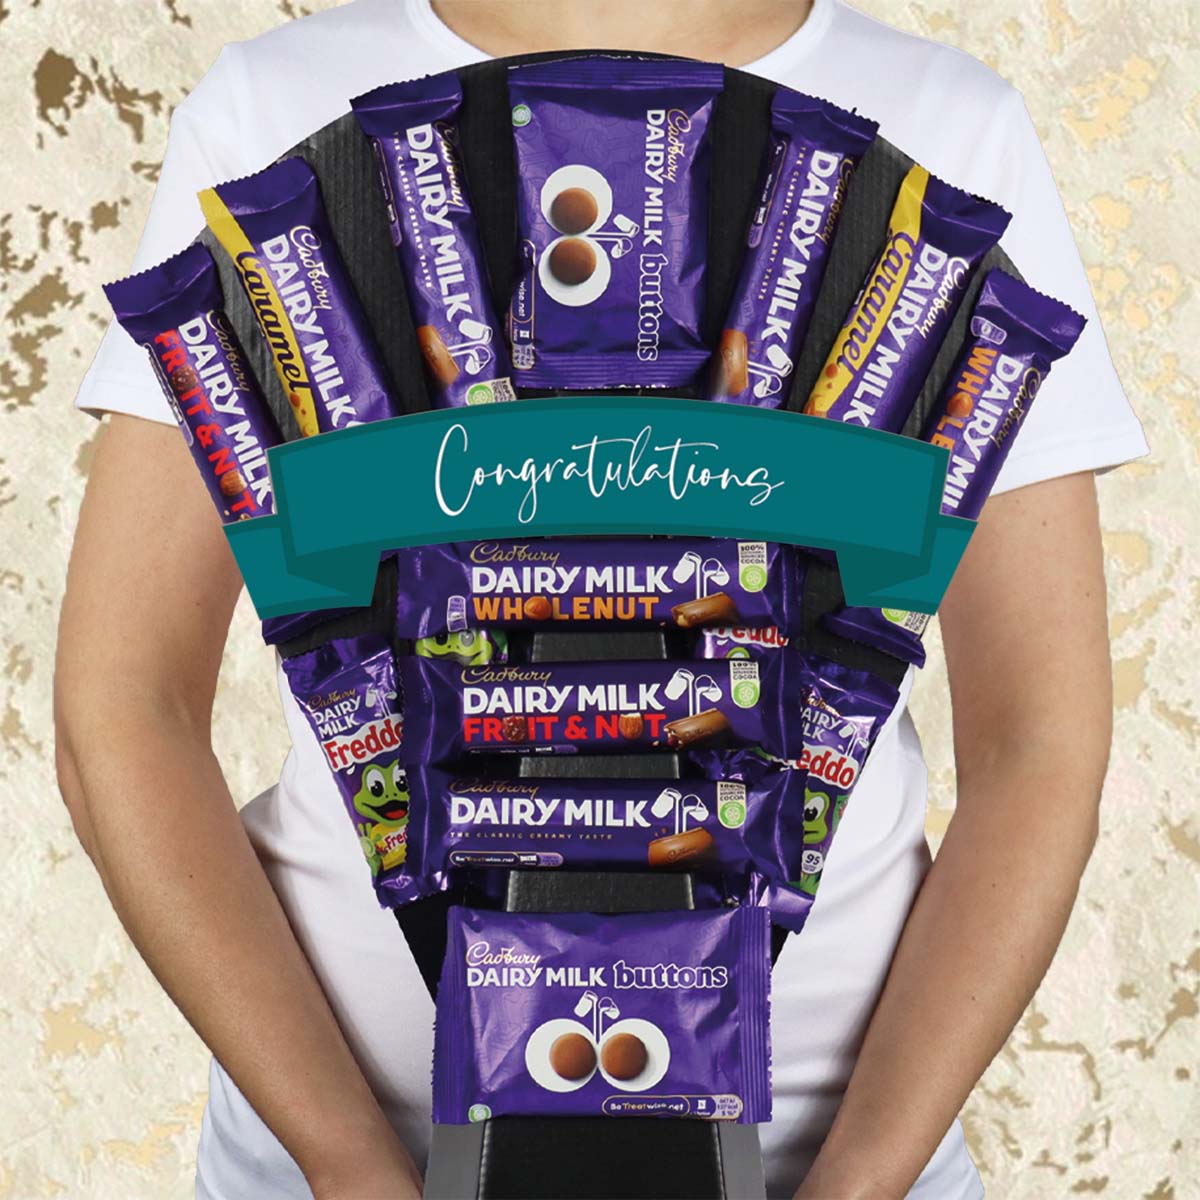 Large Dairy Milk Selection Congratulations Chocolate Bouquet - Perfect Way To Say Well Done - Gift Hamper Box by HamperWell